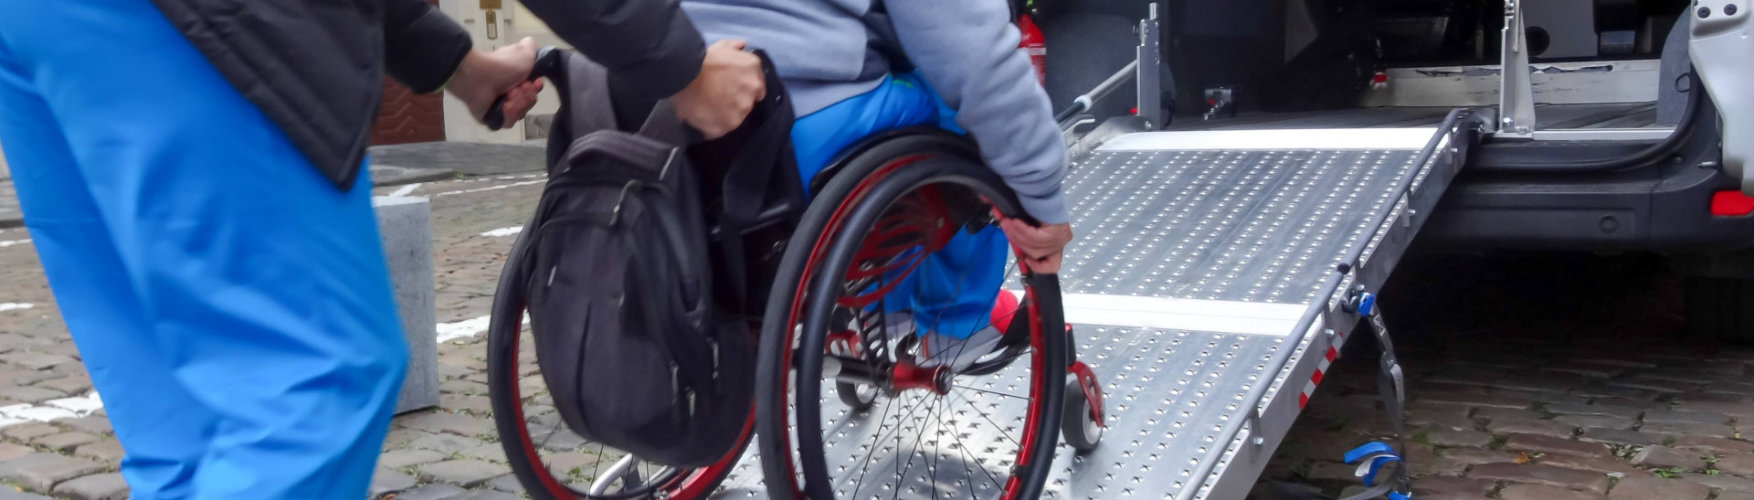 young man pushing the wheelchair inside the van